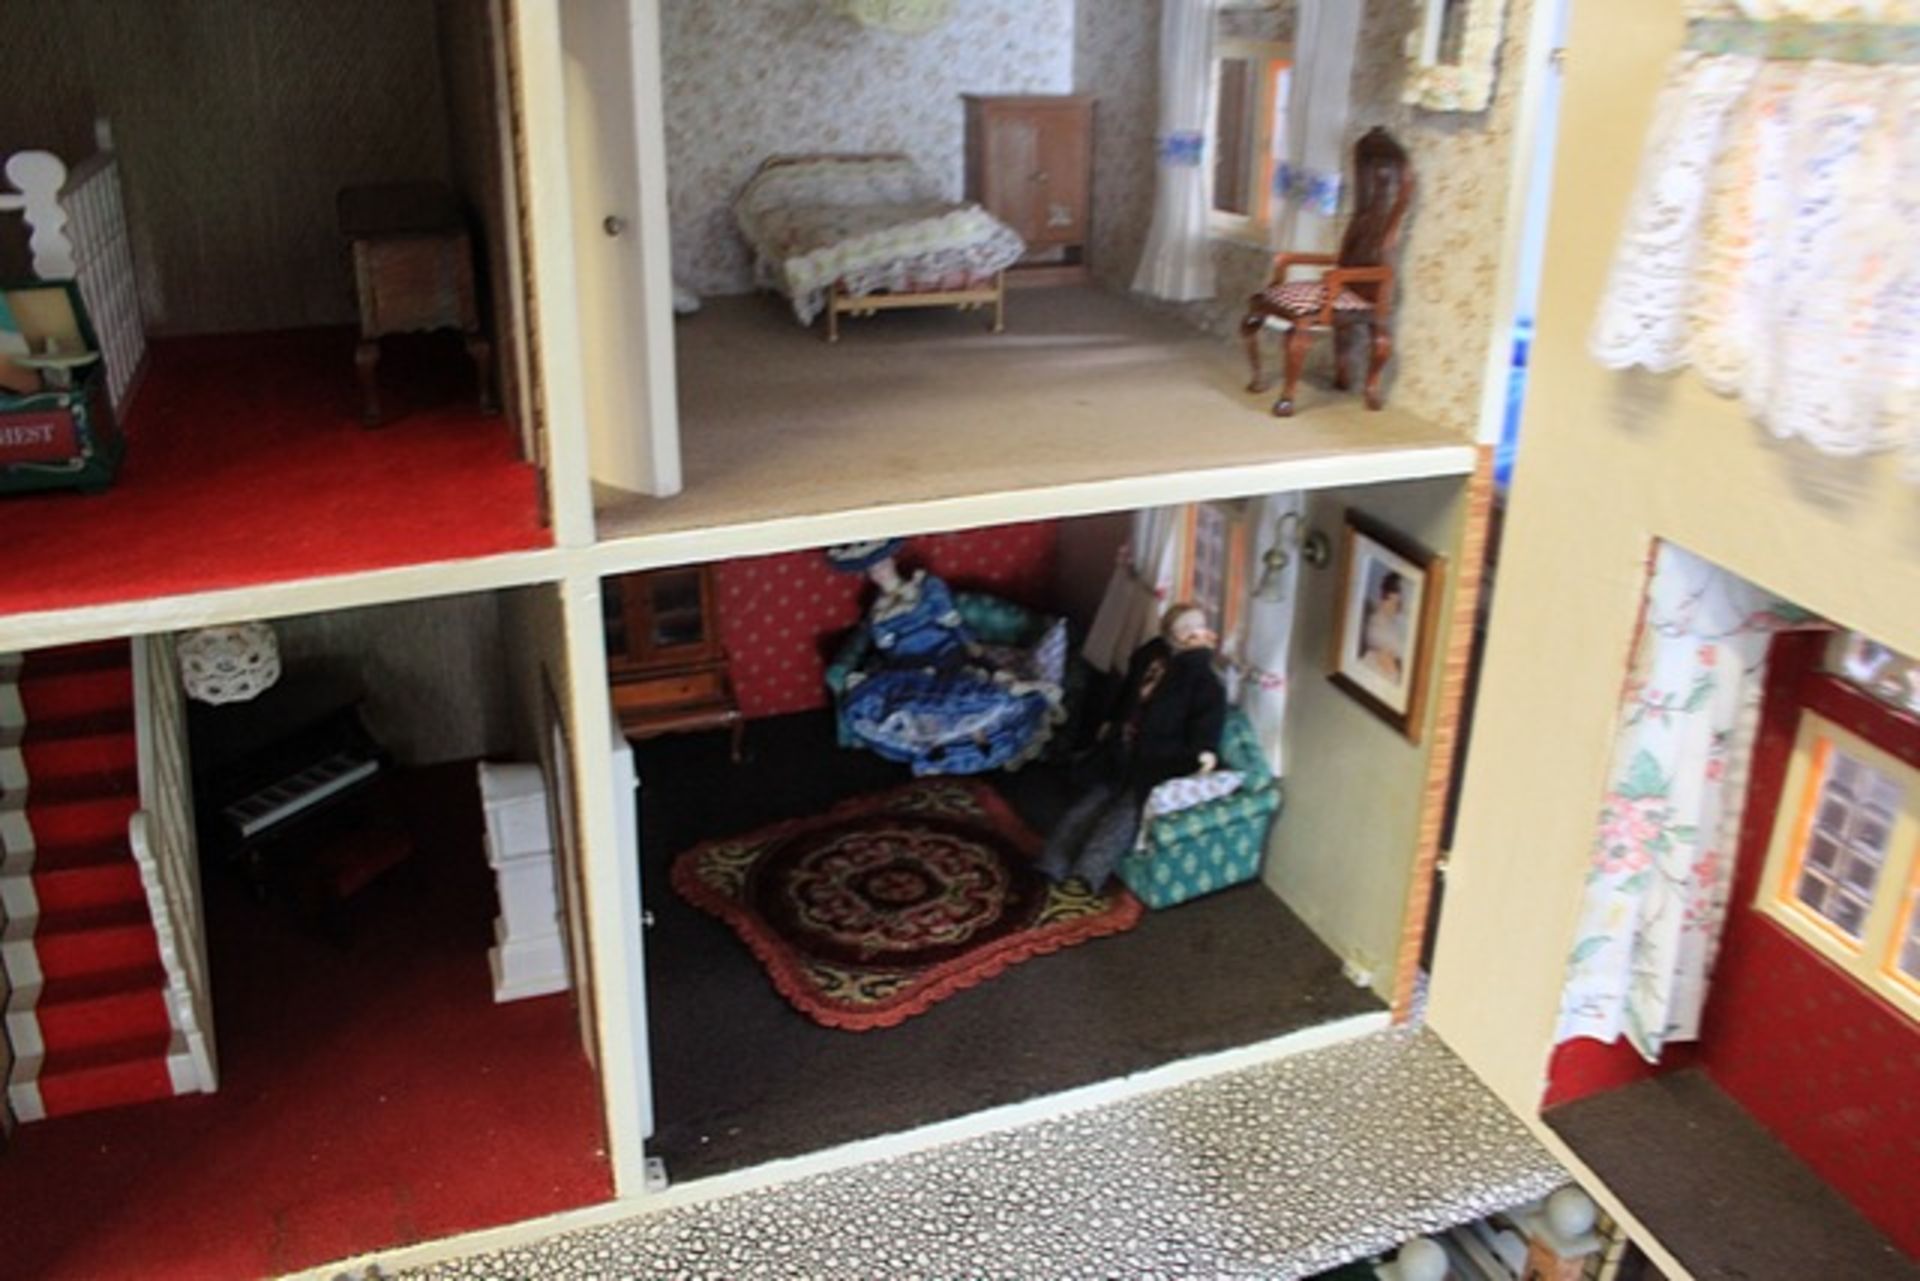 Stunning Dolls House With Pull Out Garden Area This Comes With Lots Of Furniture Including Bed, - Image 2 of 9